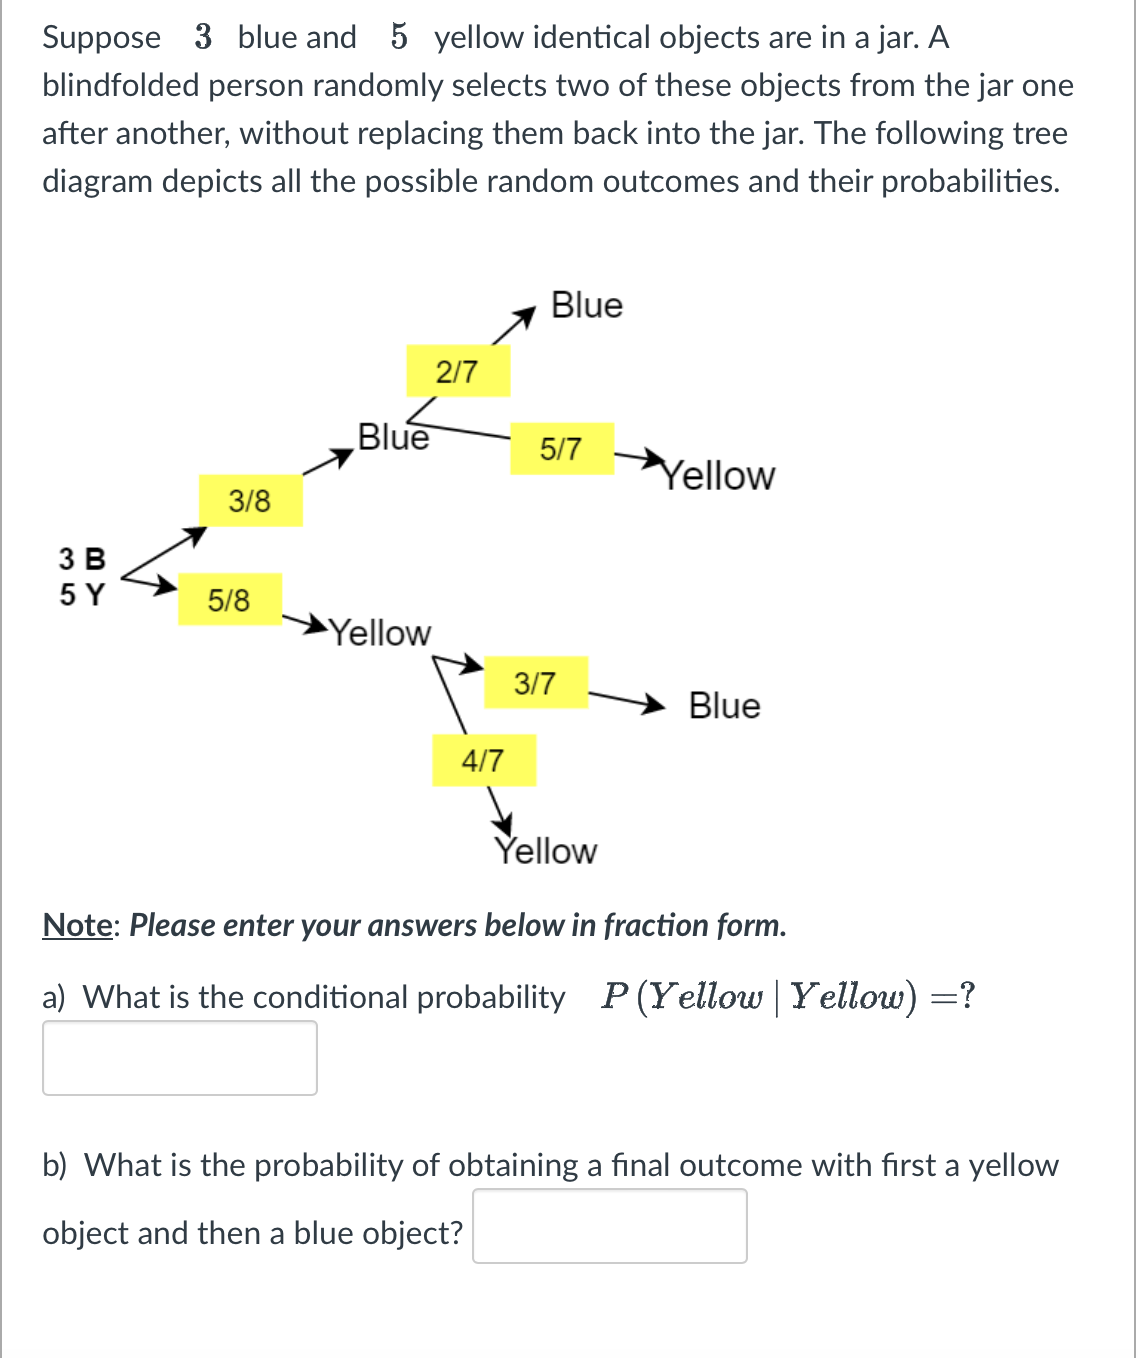 Suppose 3 blue and 5 yellow identical objects are in a jar. A
blindfolded person randomly selects two of these objects from the jar one
after another, without replacing them back into the jar. The following tree
diagram depicts all the possible random outcomes and their probabilities.
3 B
5 Y
3/8
5/8
Blue
Yellow
2/7
4/7
Blue
5/7
3/7
Yellow
Blue
Yellow
Note: Please enter your answers below in fraction form.
a) What is the conditional probability P(Yellow | Yellow) =?
b) What is the probability of obtaining a final outcome with first a yellow
object and then a blue object?